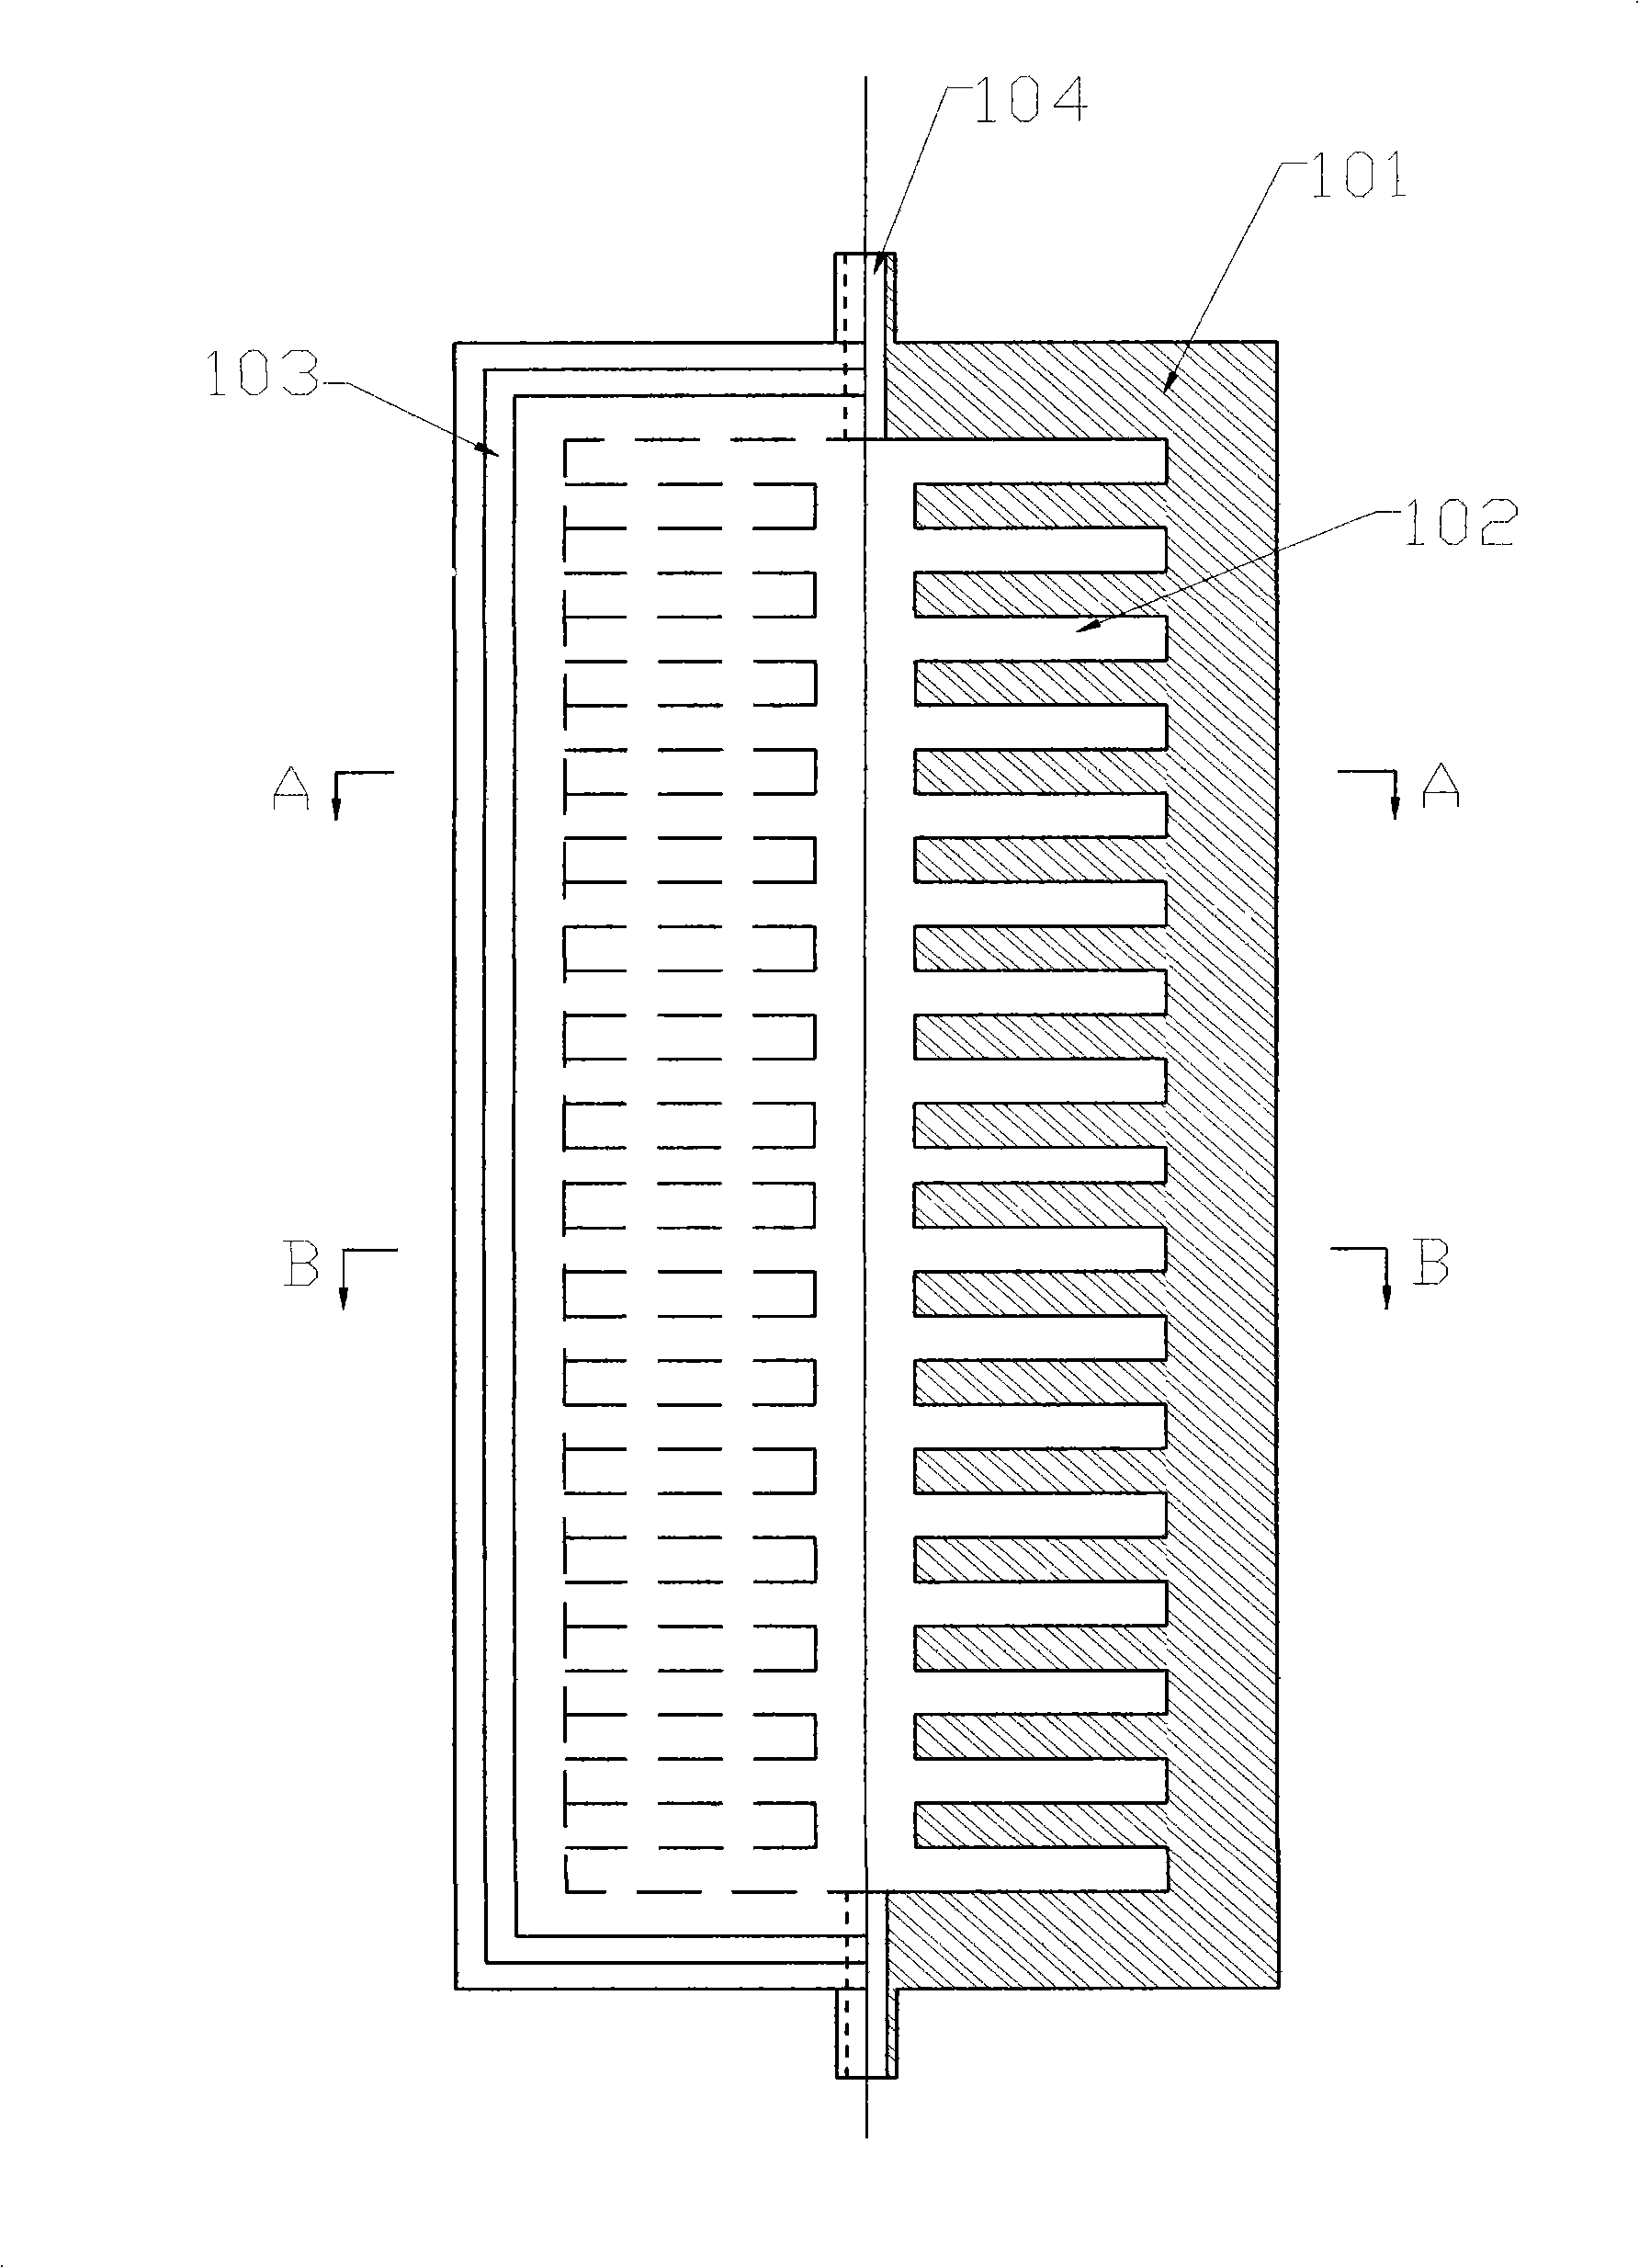 Electric preheating and constant temperature membrane separation device for producing high-purity hydrogen